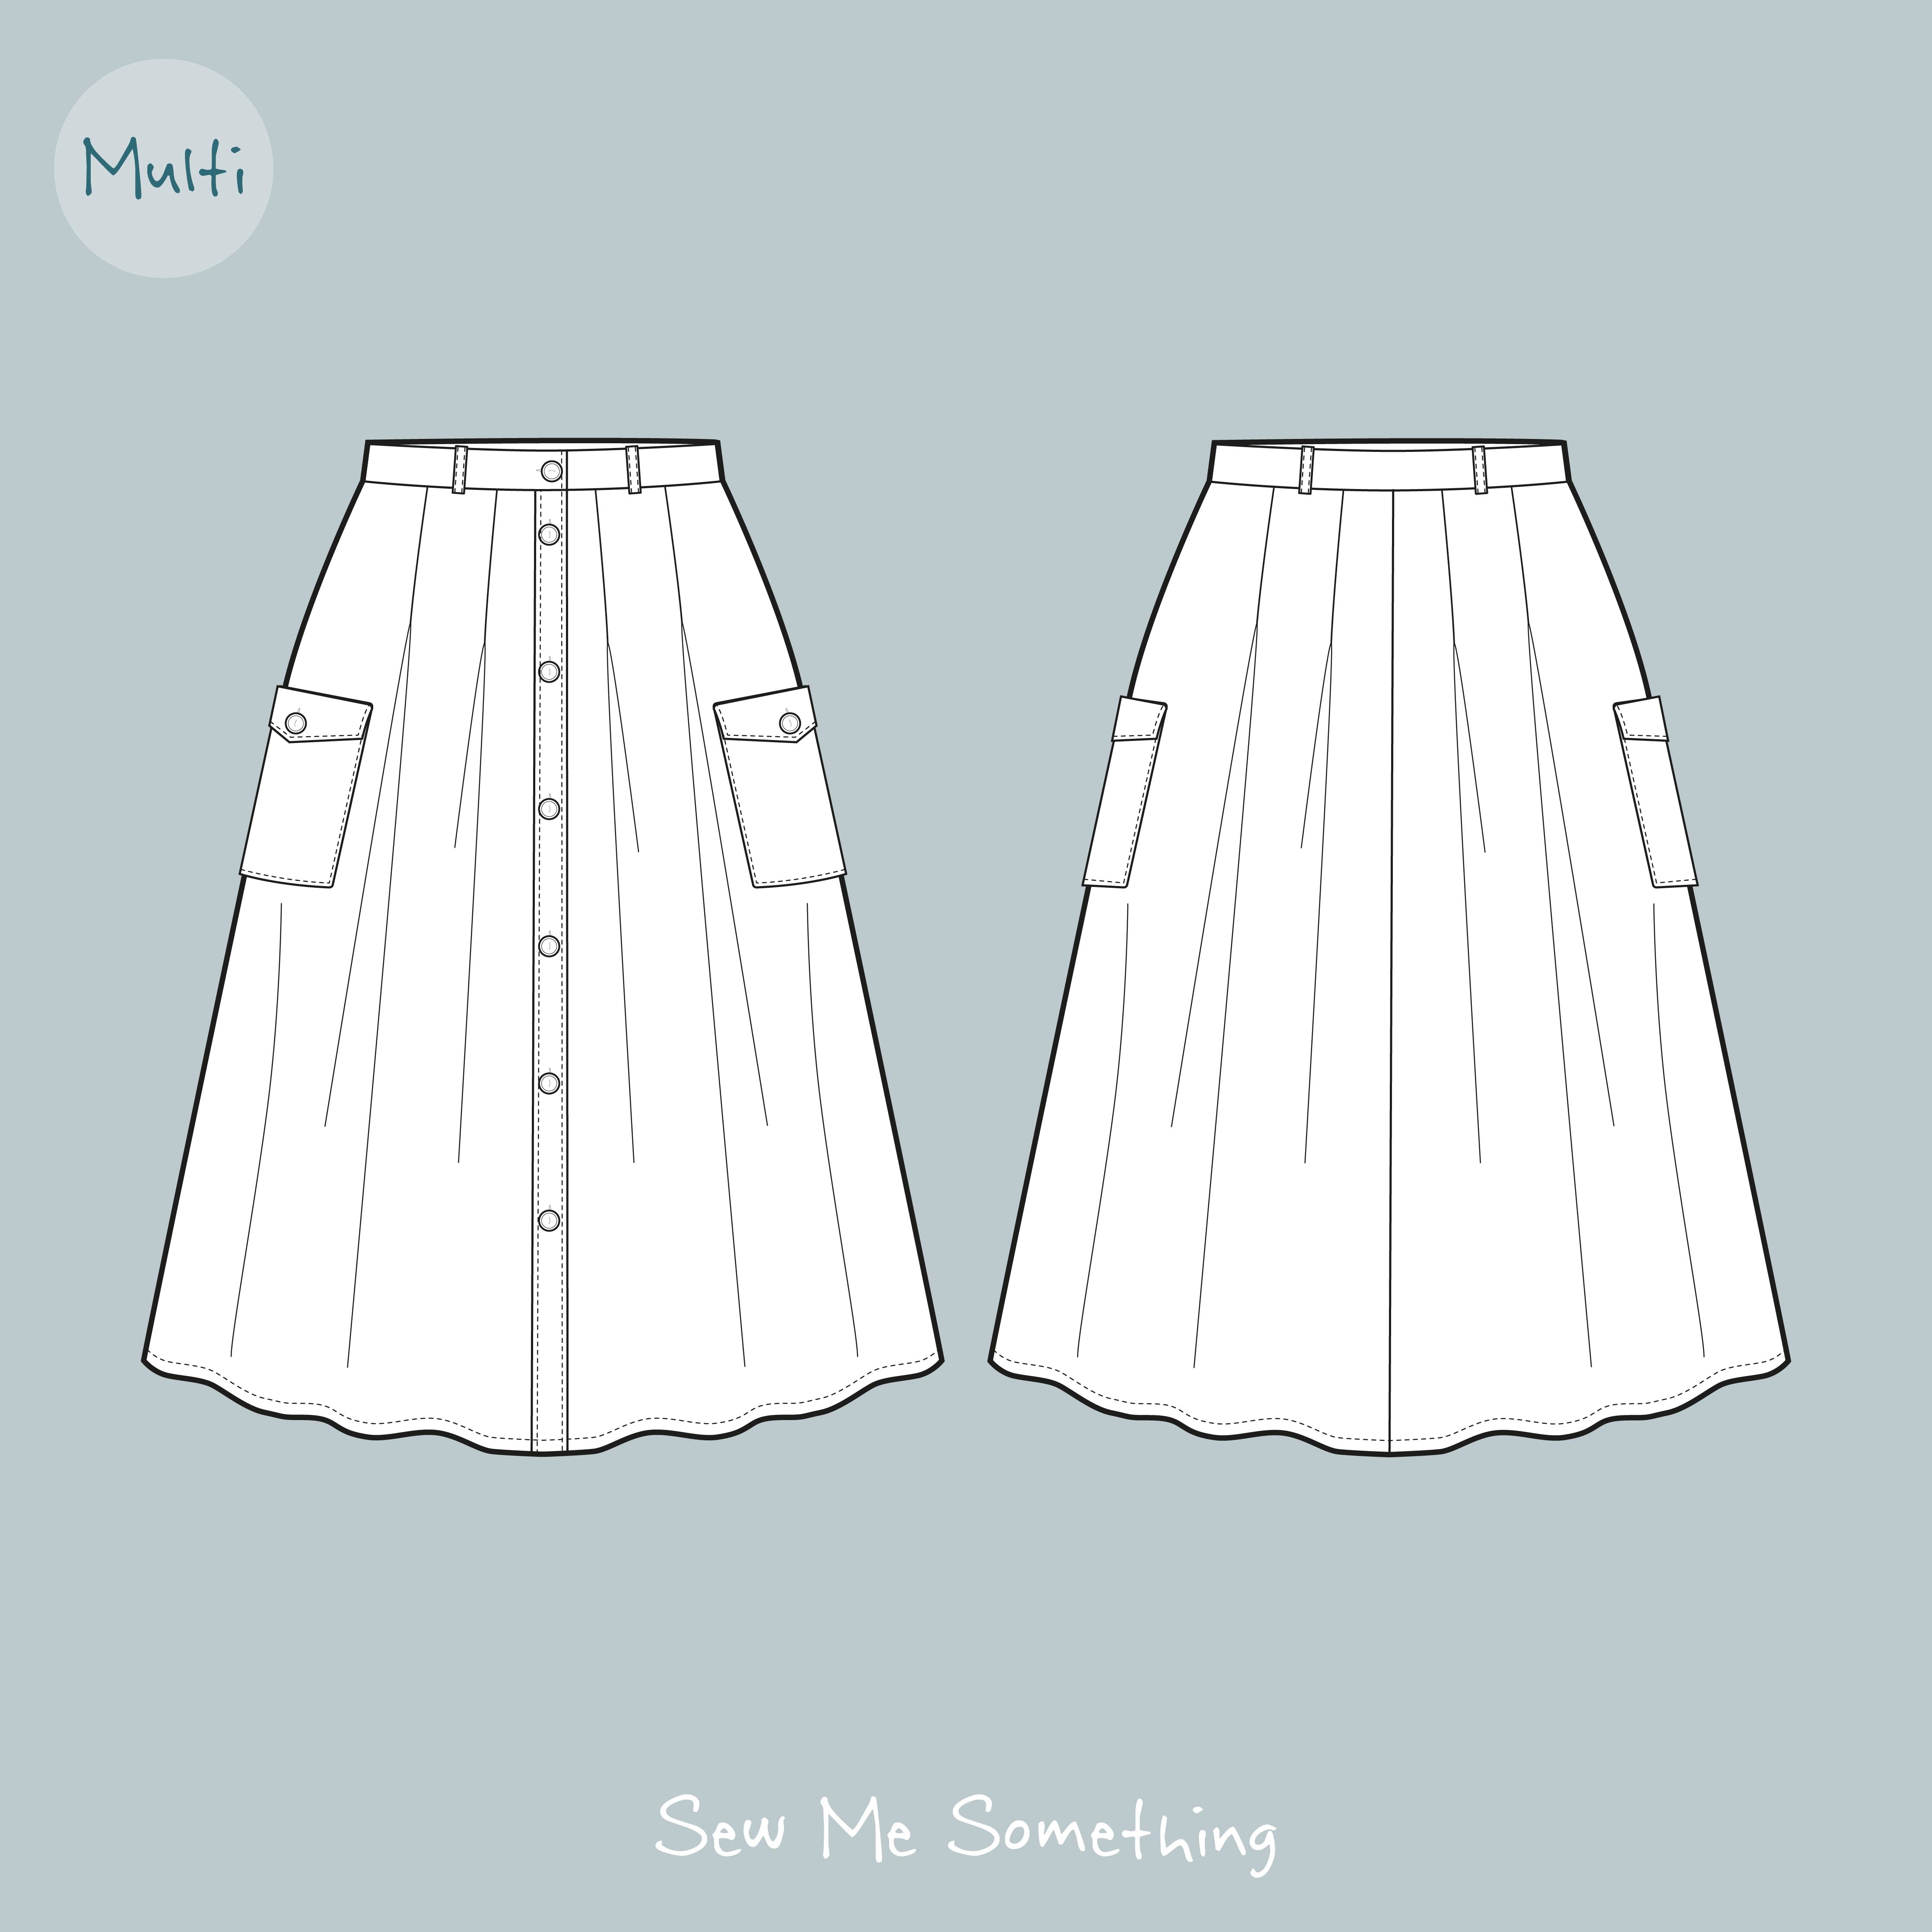 Desdemona Skirt Sewing Pattern - Front and back aspect